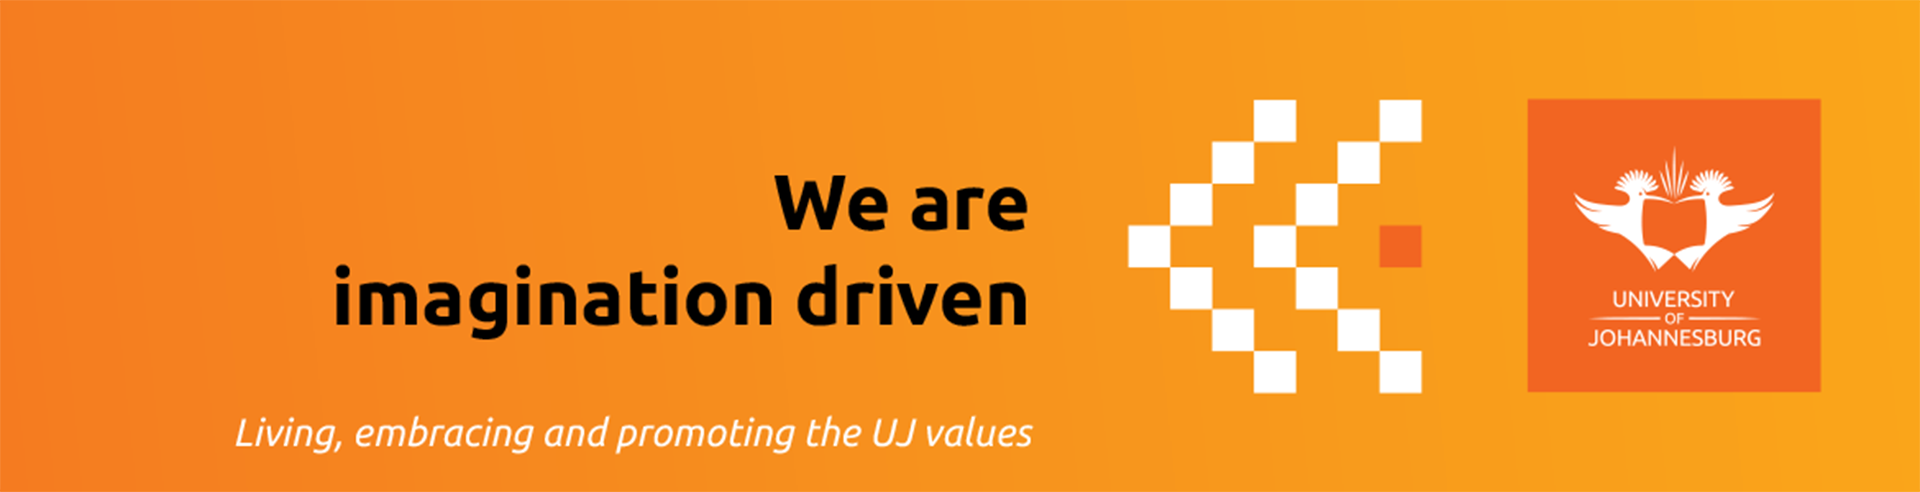 Uj Values Expressions Posters 2020 Ulink 1170x300mm 39